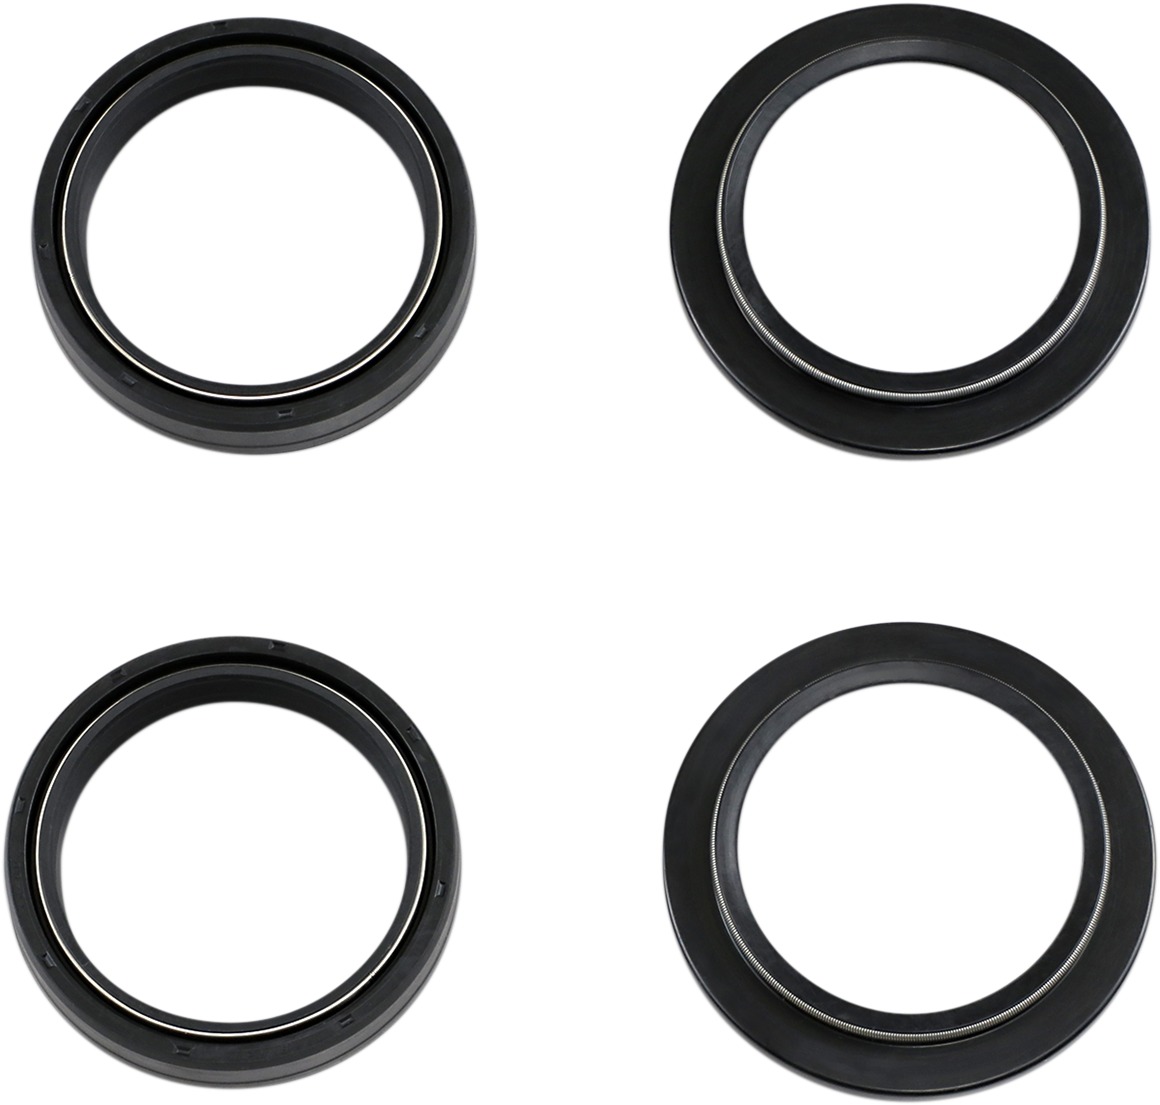 Fork Seal & Dust Wiper Kit - CR125/250/500 & XR400/600R & XR650L & DR350 - Click Image to Close